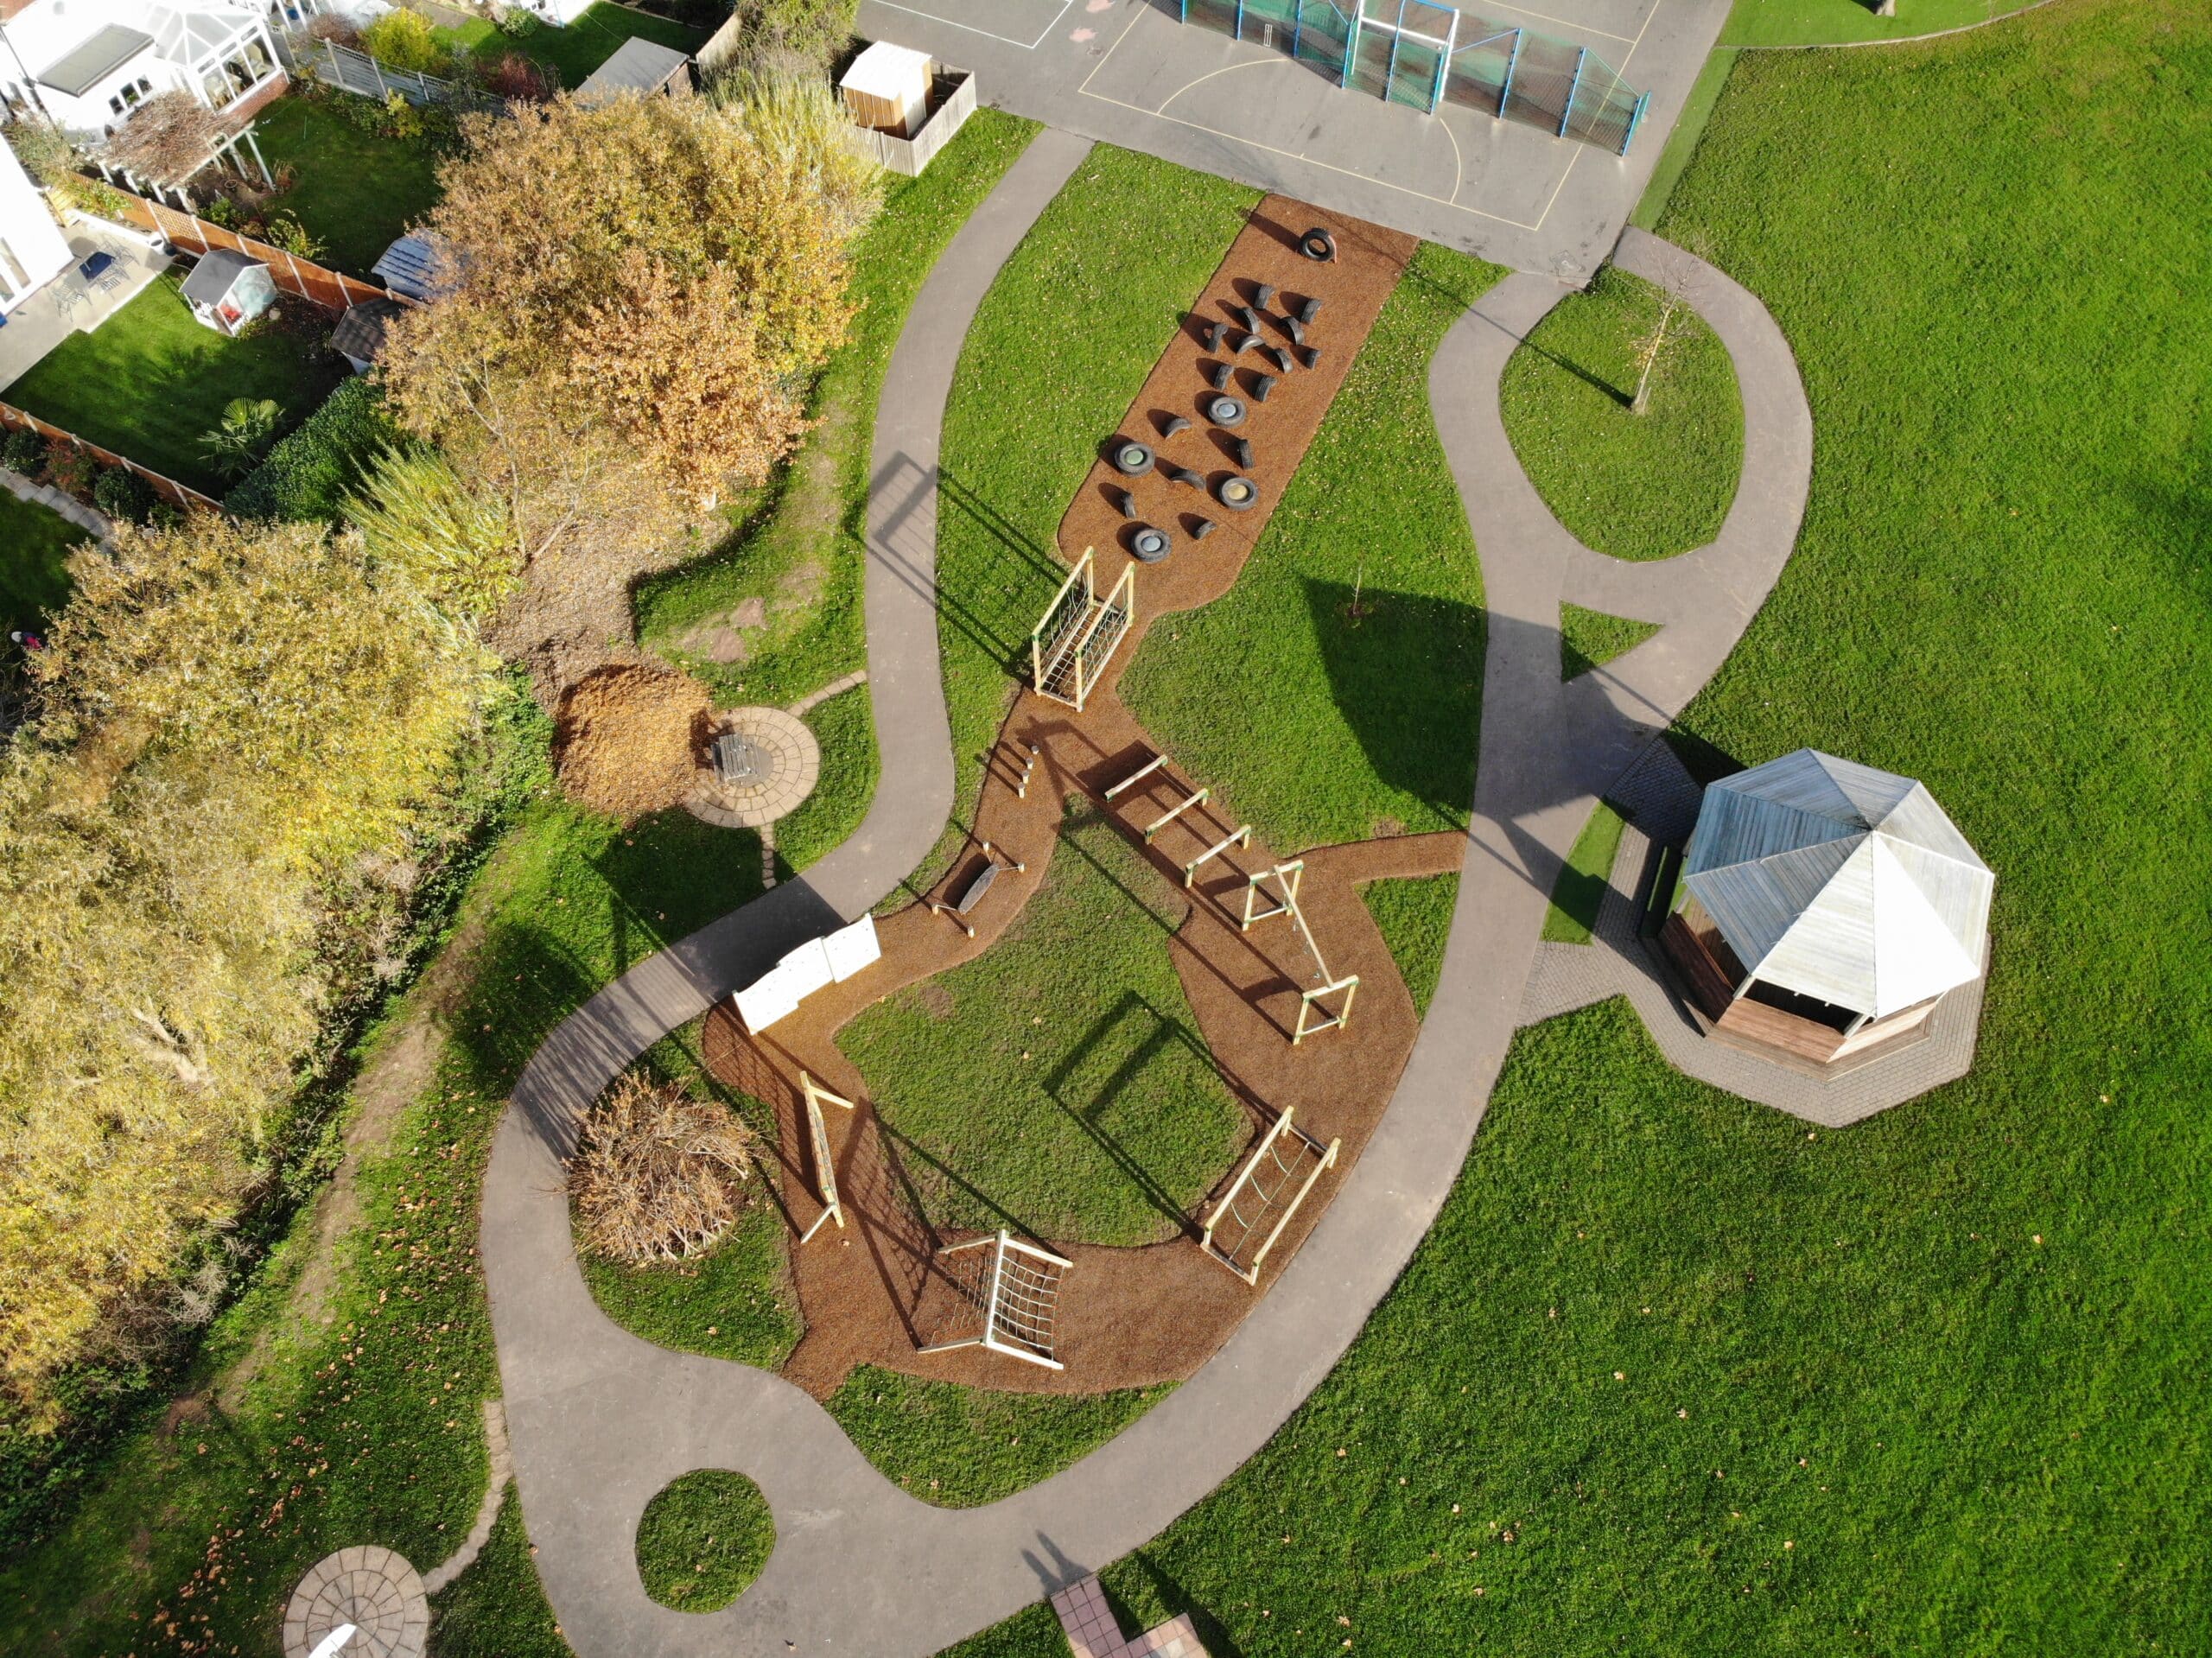 Trim Trail playground as seen from above